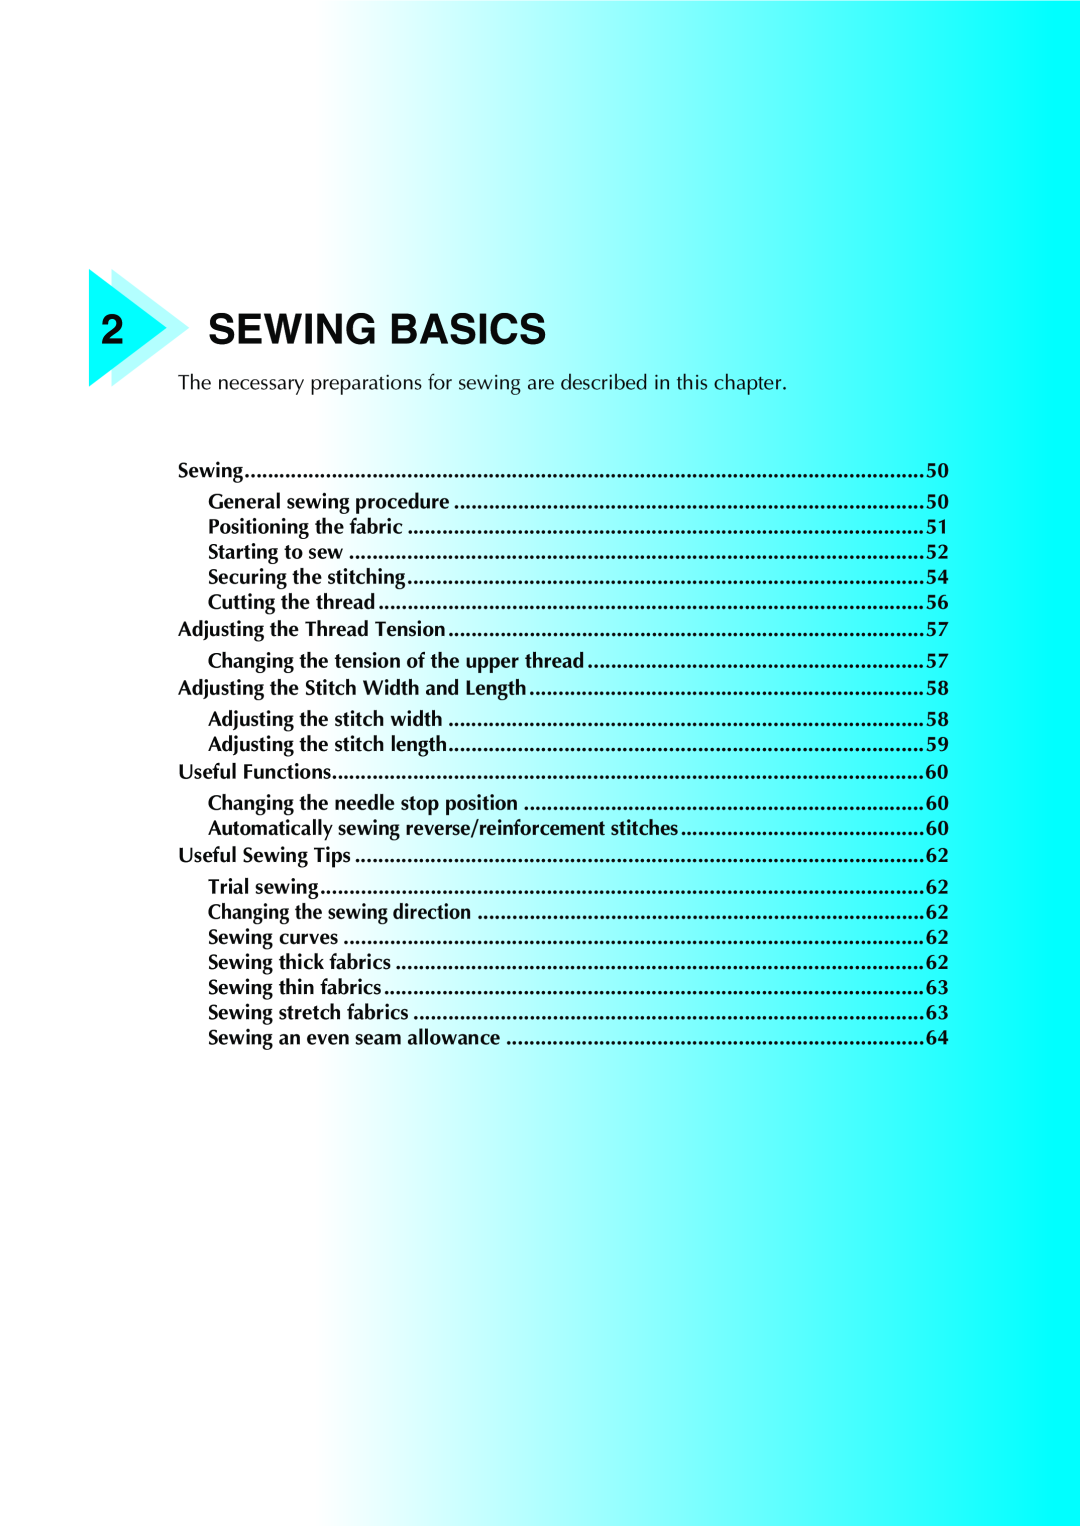 Brother Sewing Machines operation manual Sewing Basics, The necessary preparations for sewing are described in this chapter 